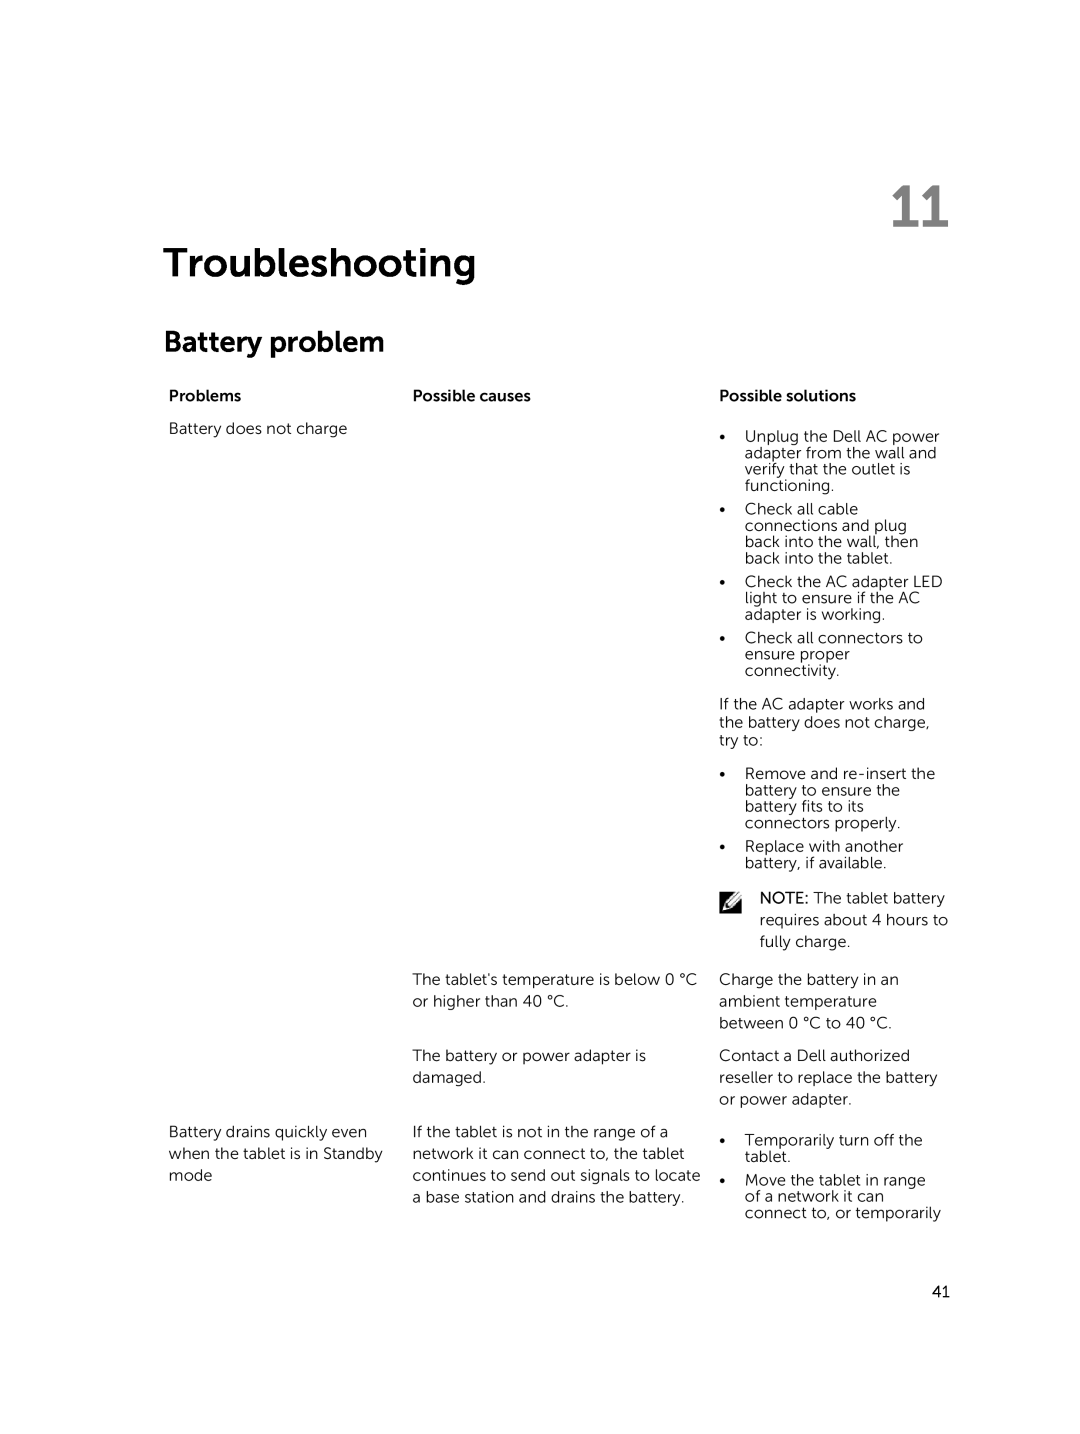 Dell PRO11I6363BLK, T07G manual Troubleshooting, Battery problem 